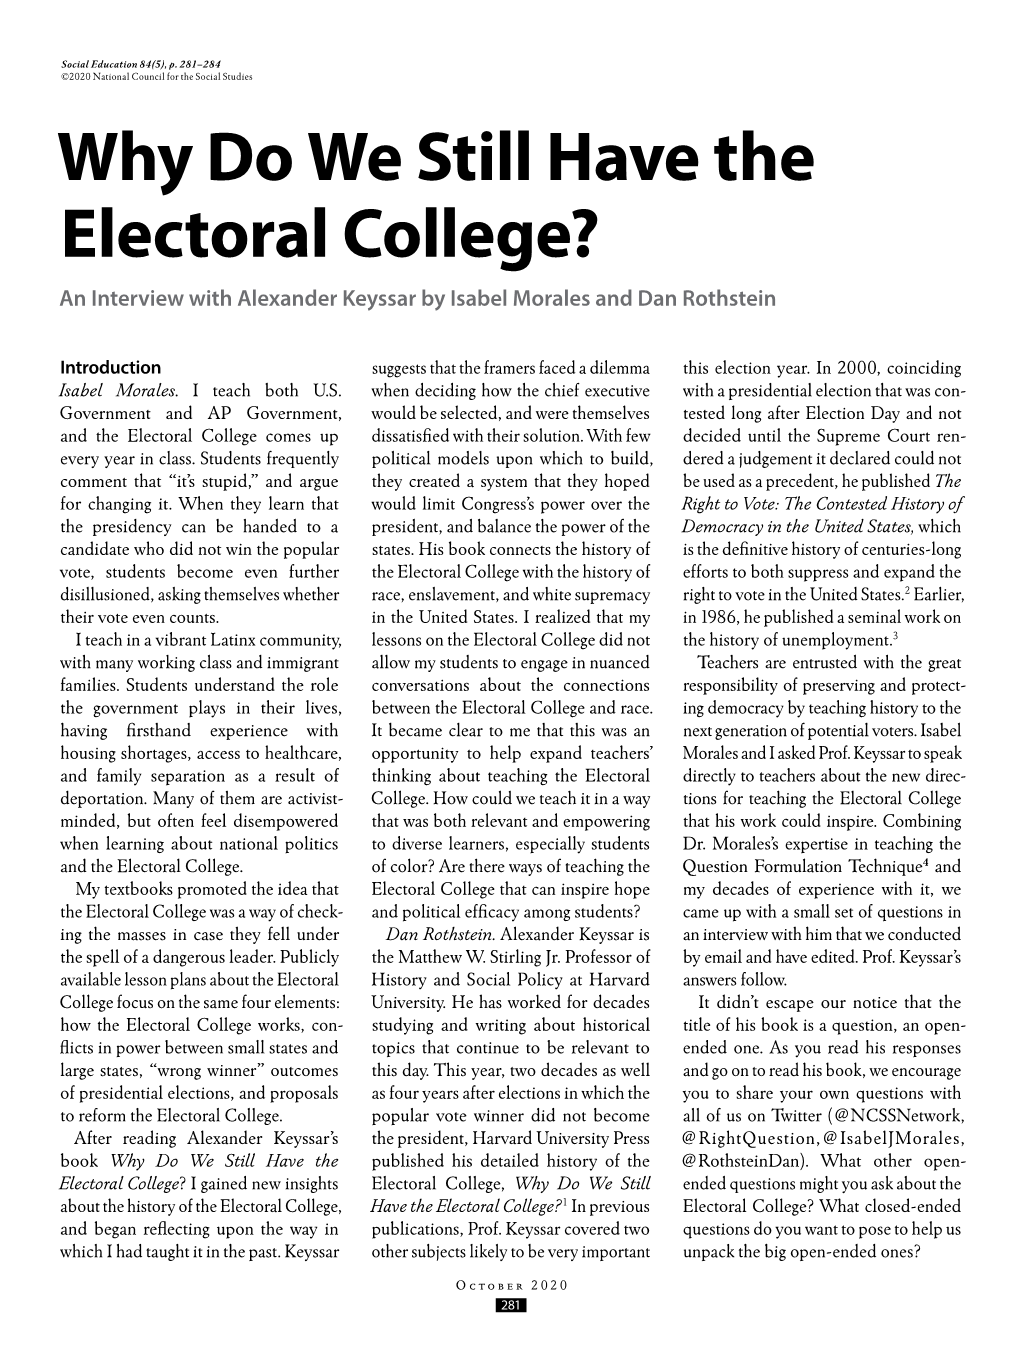 Why Do We Still Have the Electoral College? an Interview with Alexander Keyssar by Isabel Morales and Dan Rothstein